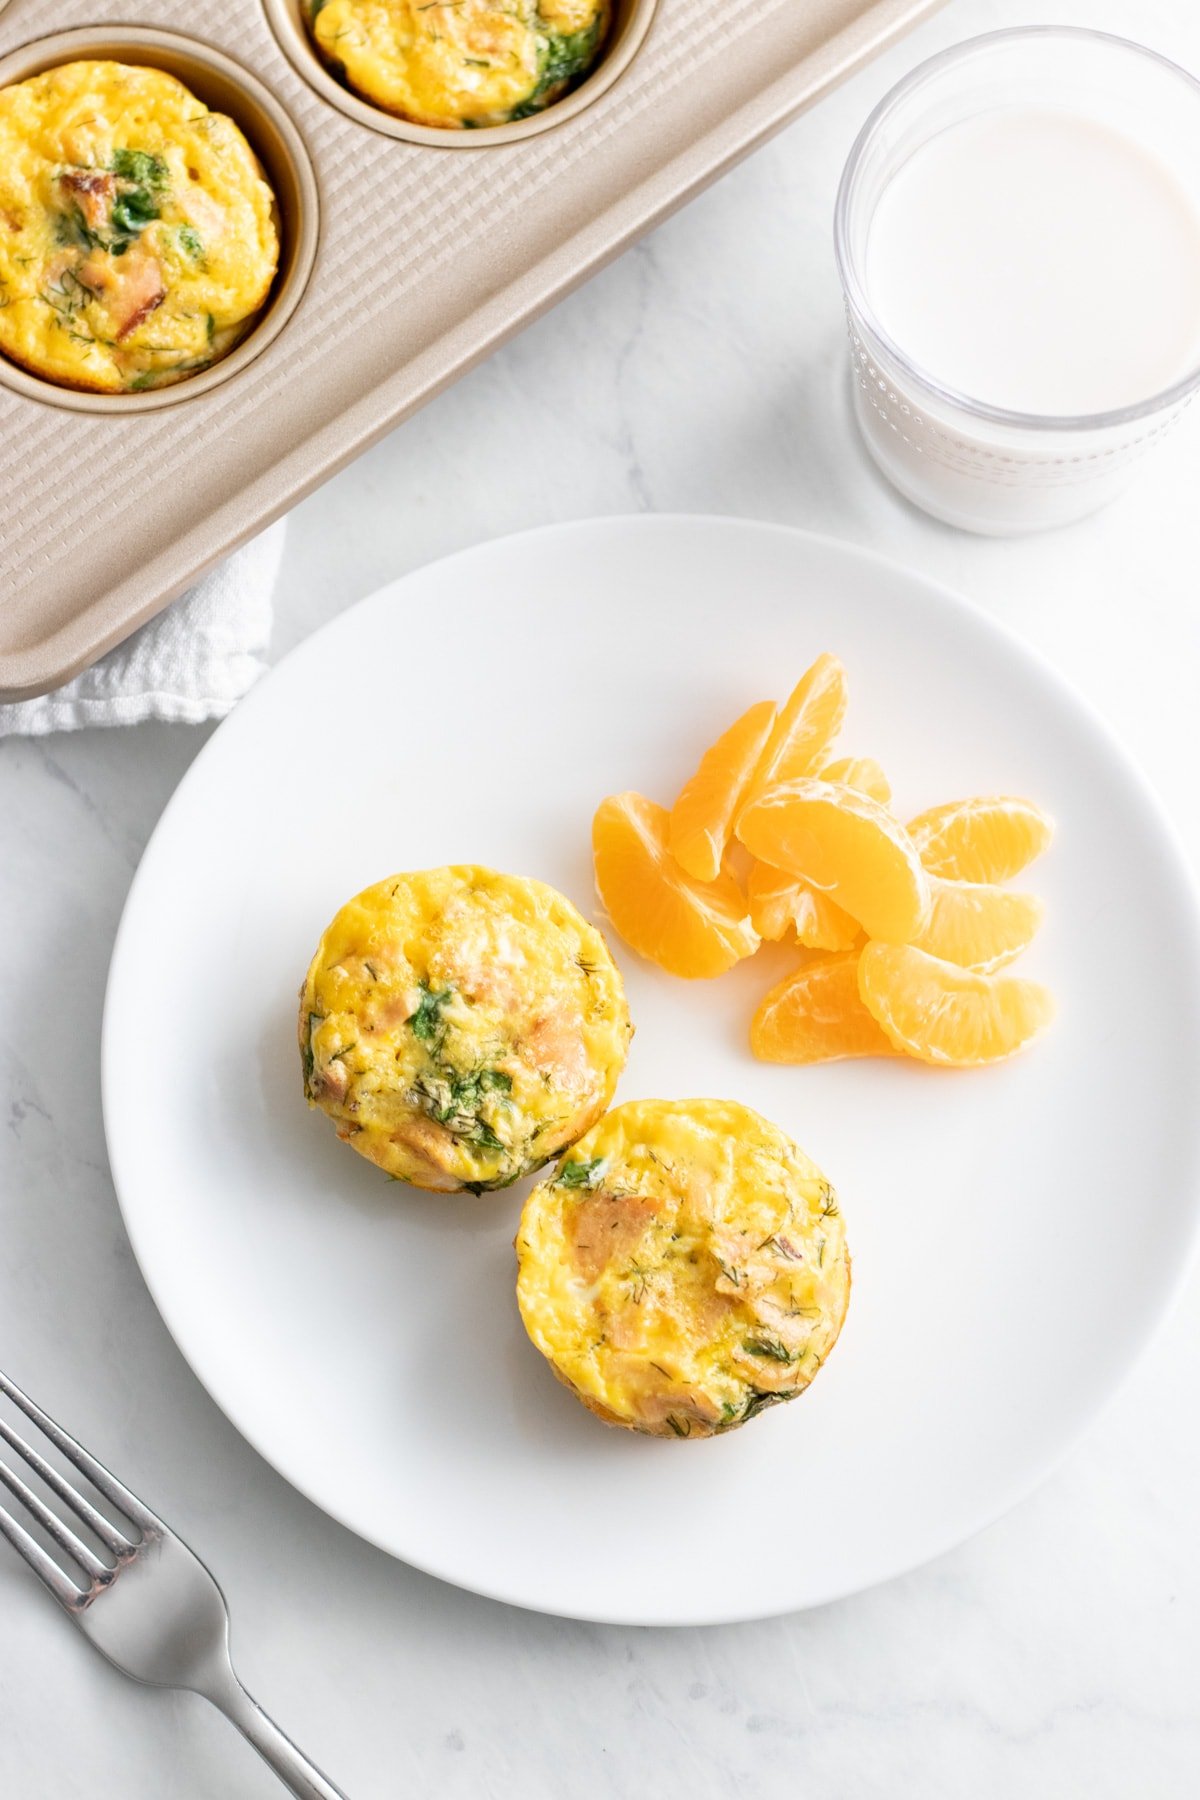 Two smoked salmon and dill egg cups  on a small plate with orange segments. A glass of lactose-free milk and a muffin tin with more egg cups sit nearby.